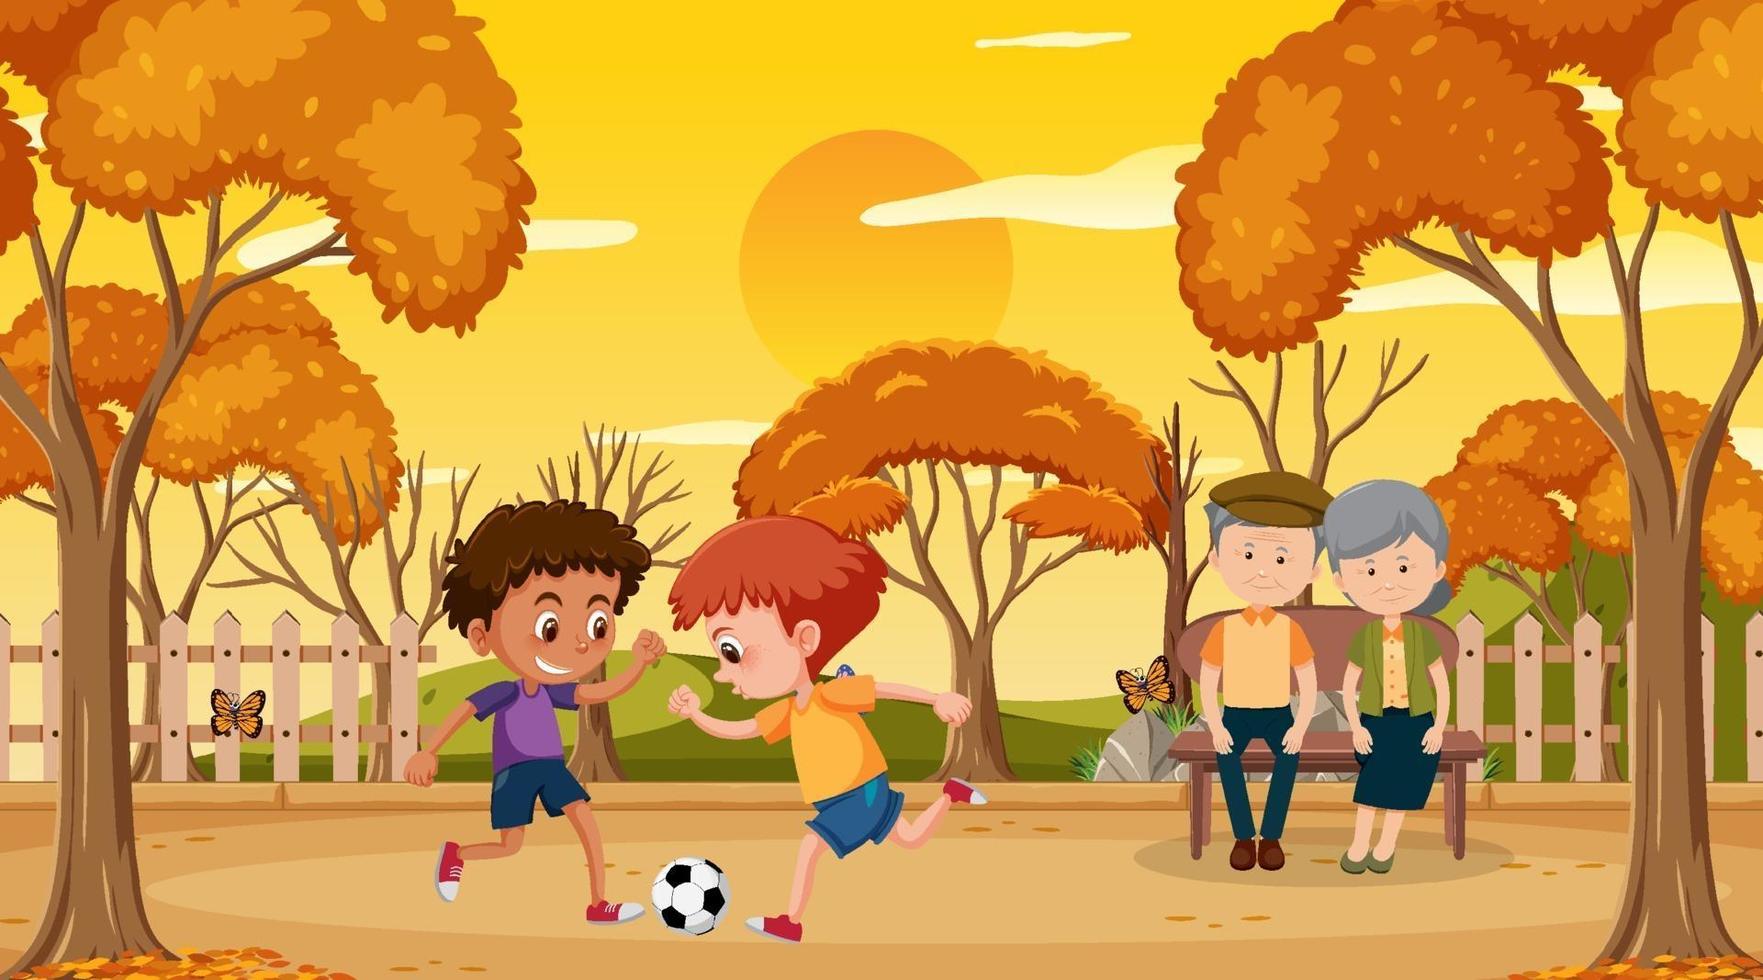 Park at sunset time scene with children playing football vector